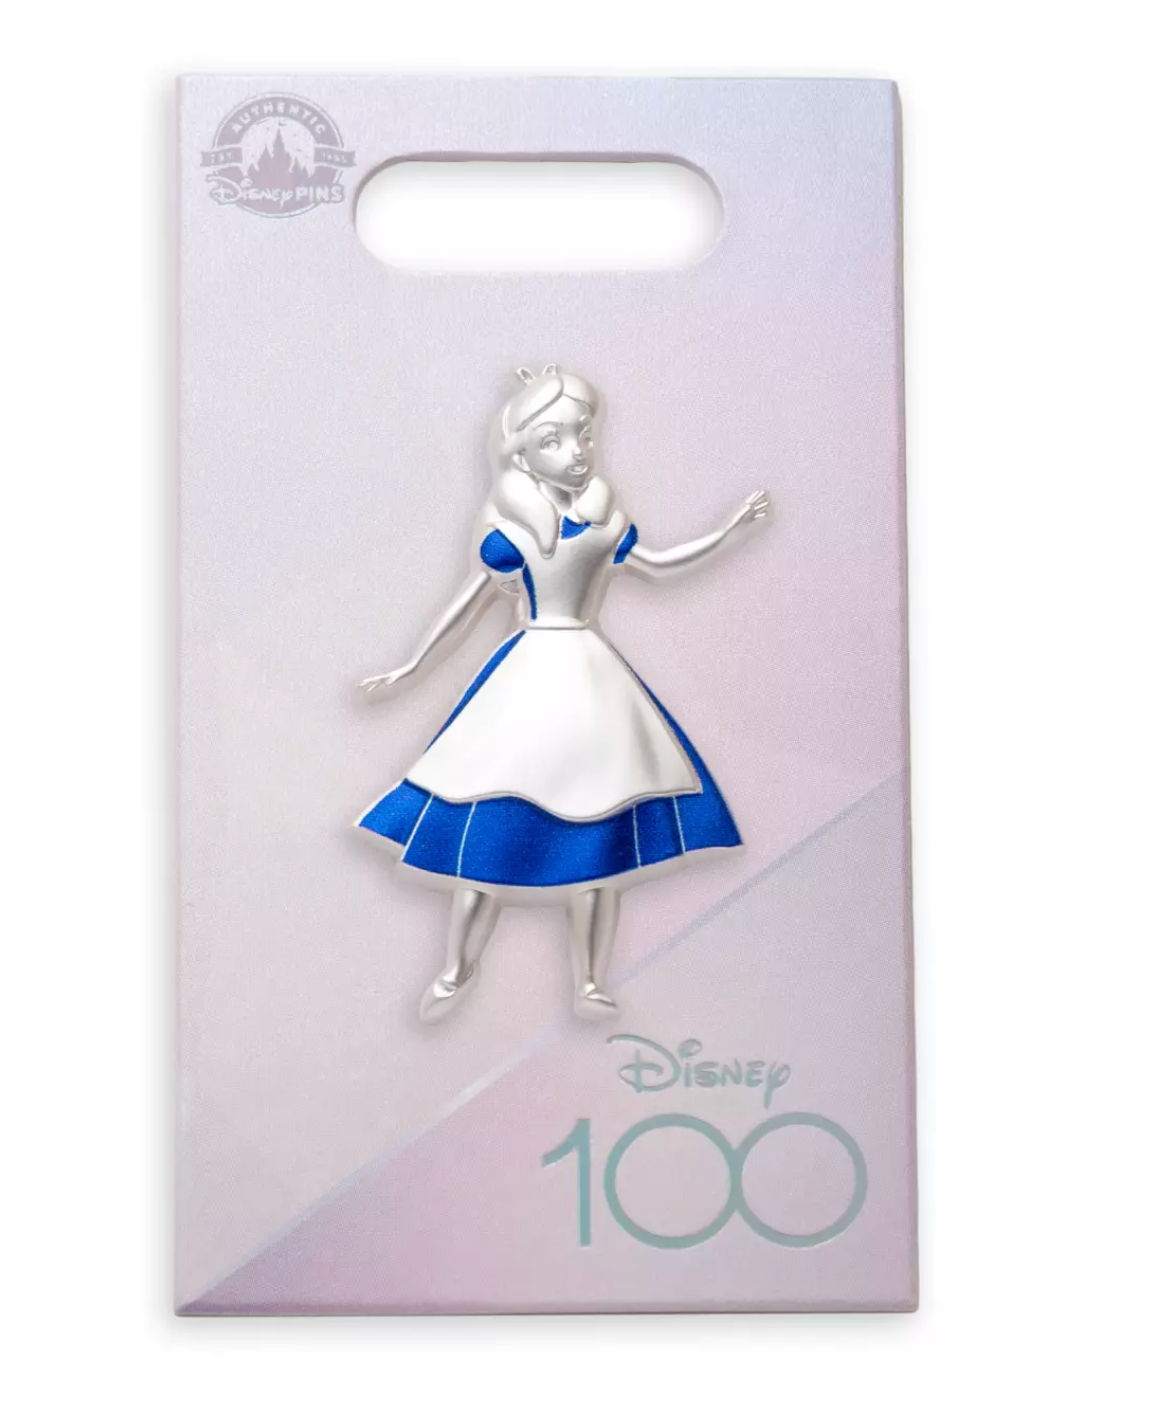 Disney 100 Years of Wonder Celebration Alice in Wonderland 3D Pin New with Card